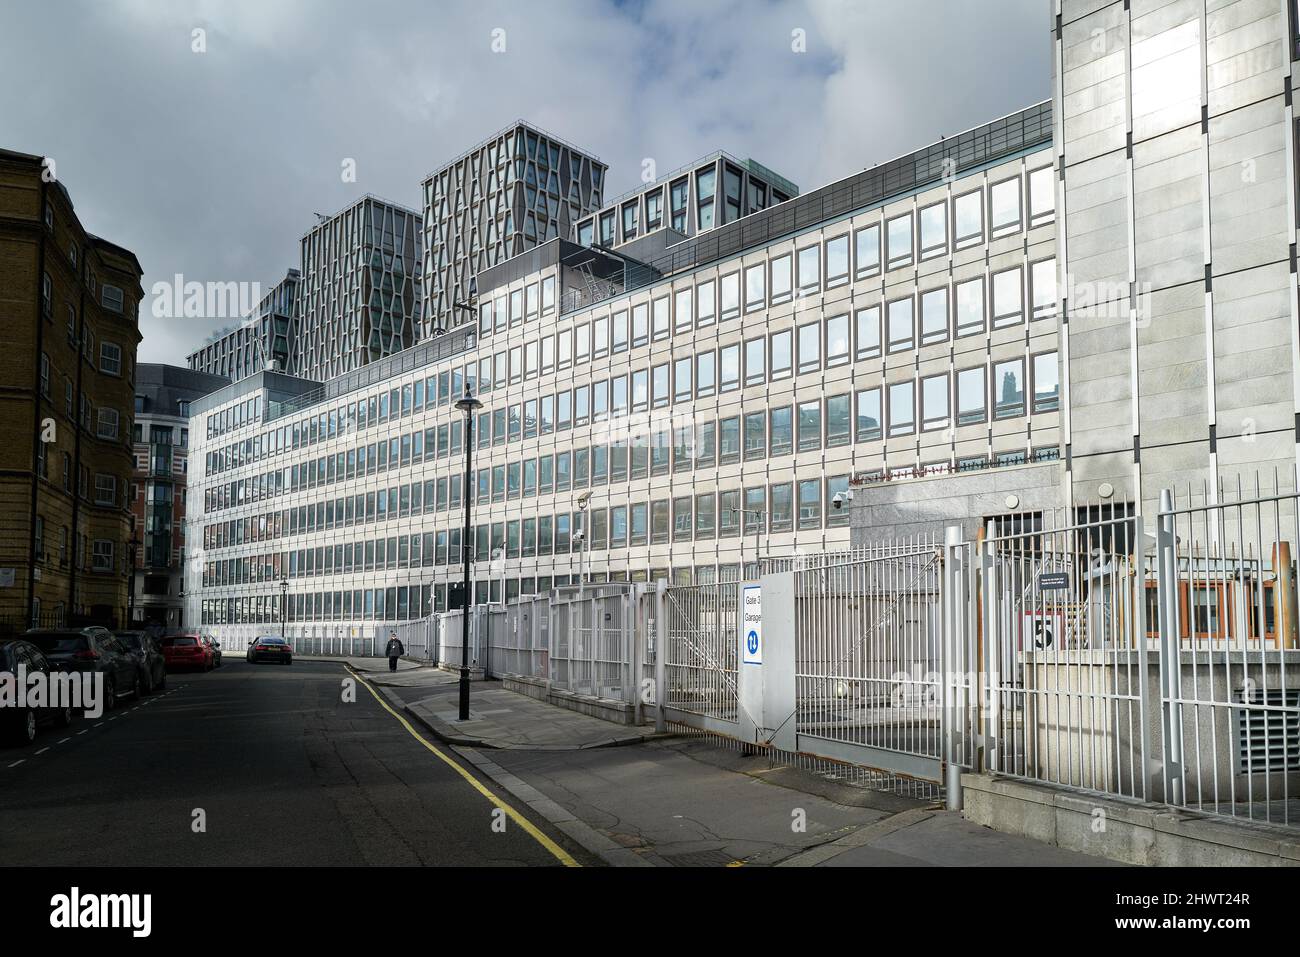 The british government's department for business, energy & industrial stragey building, London, England. Stock Photo